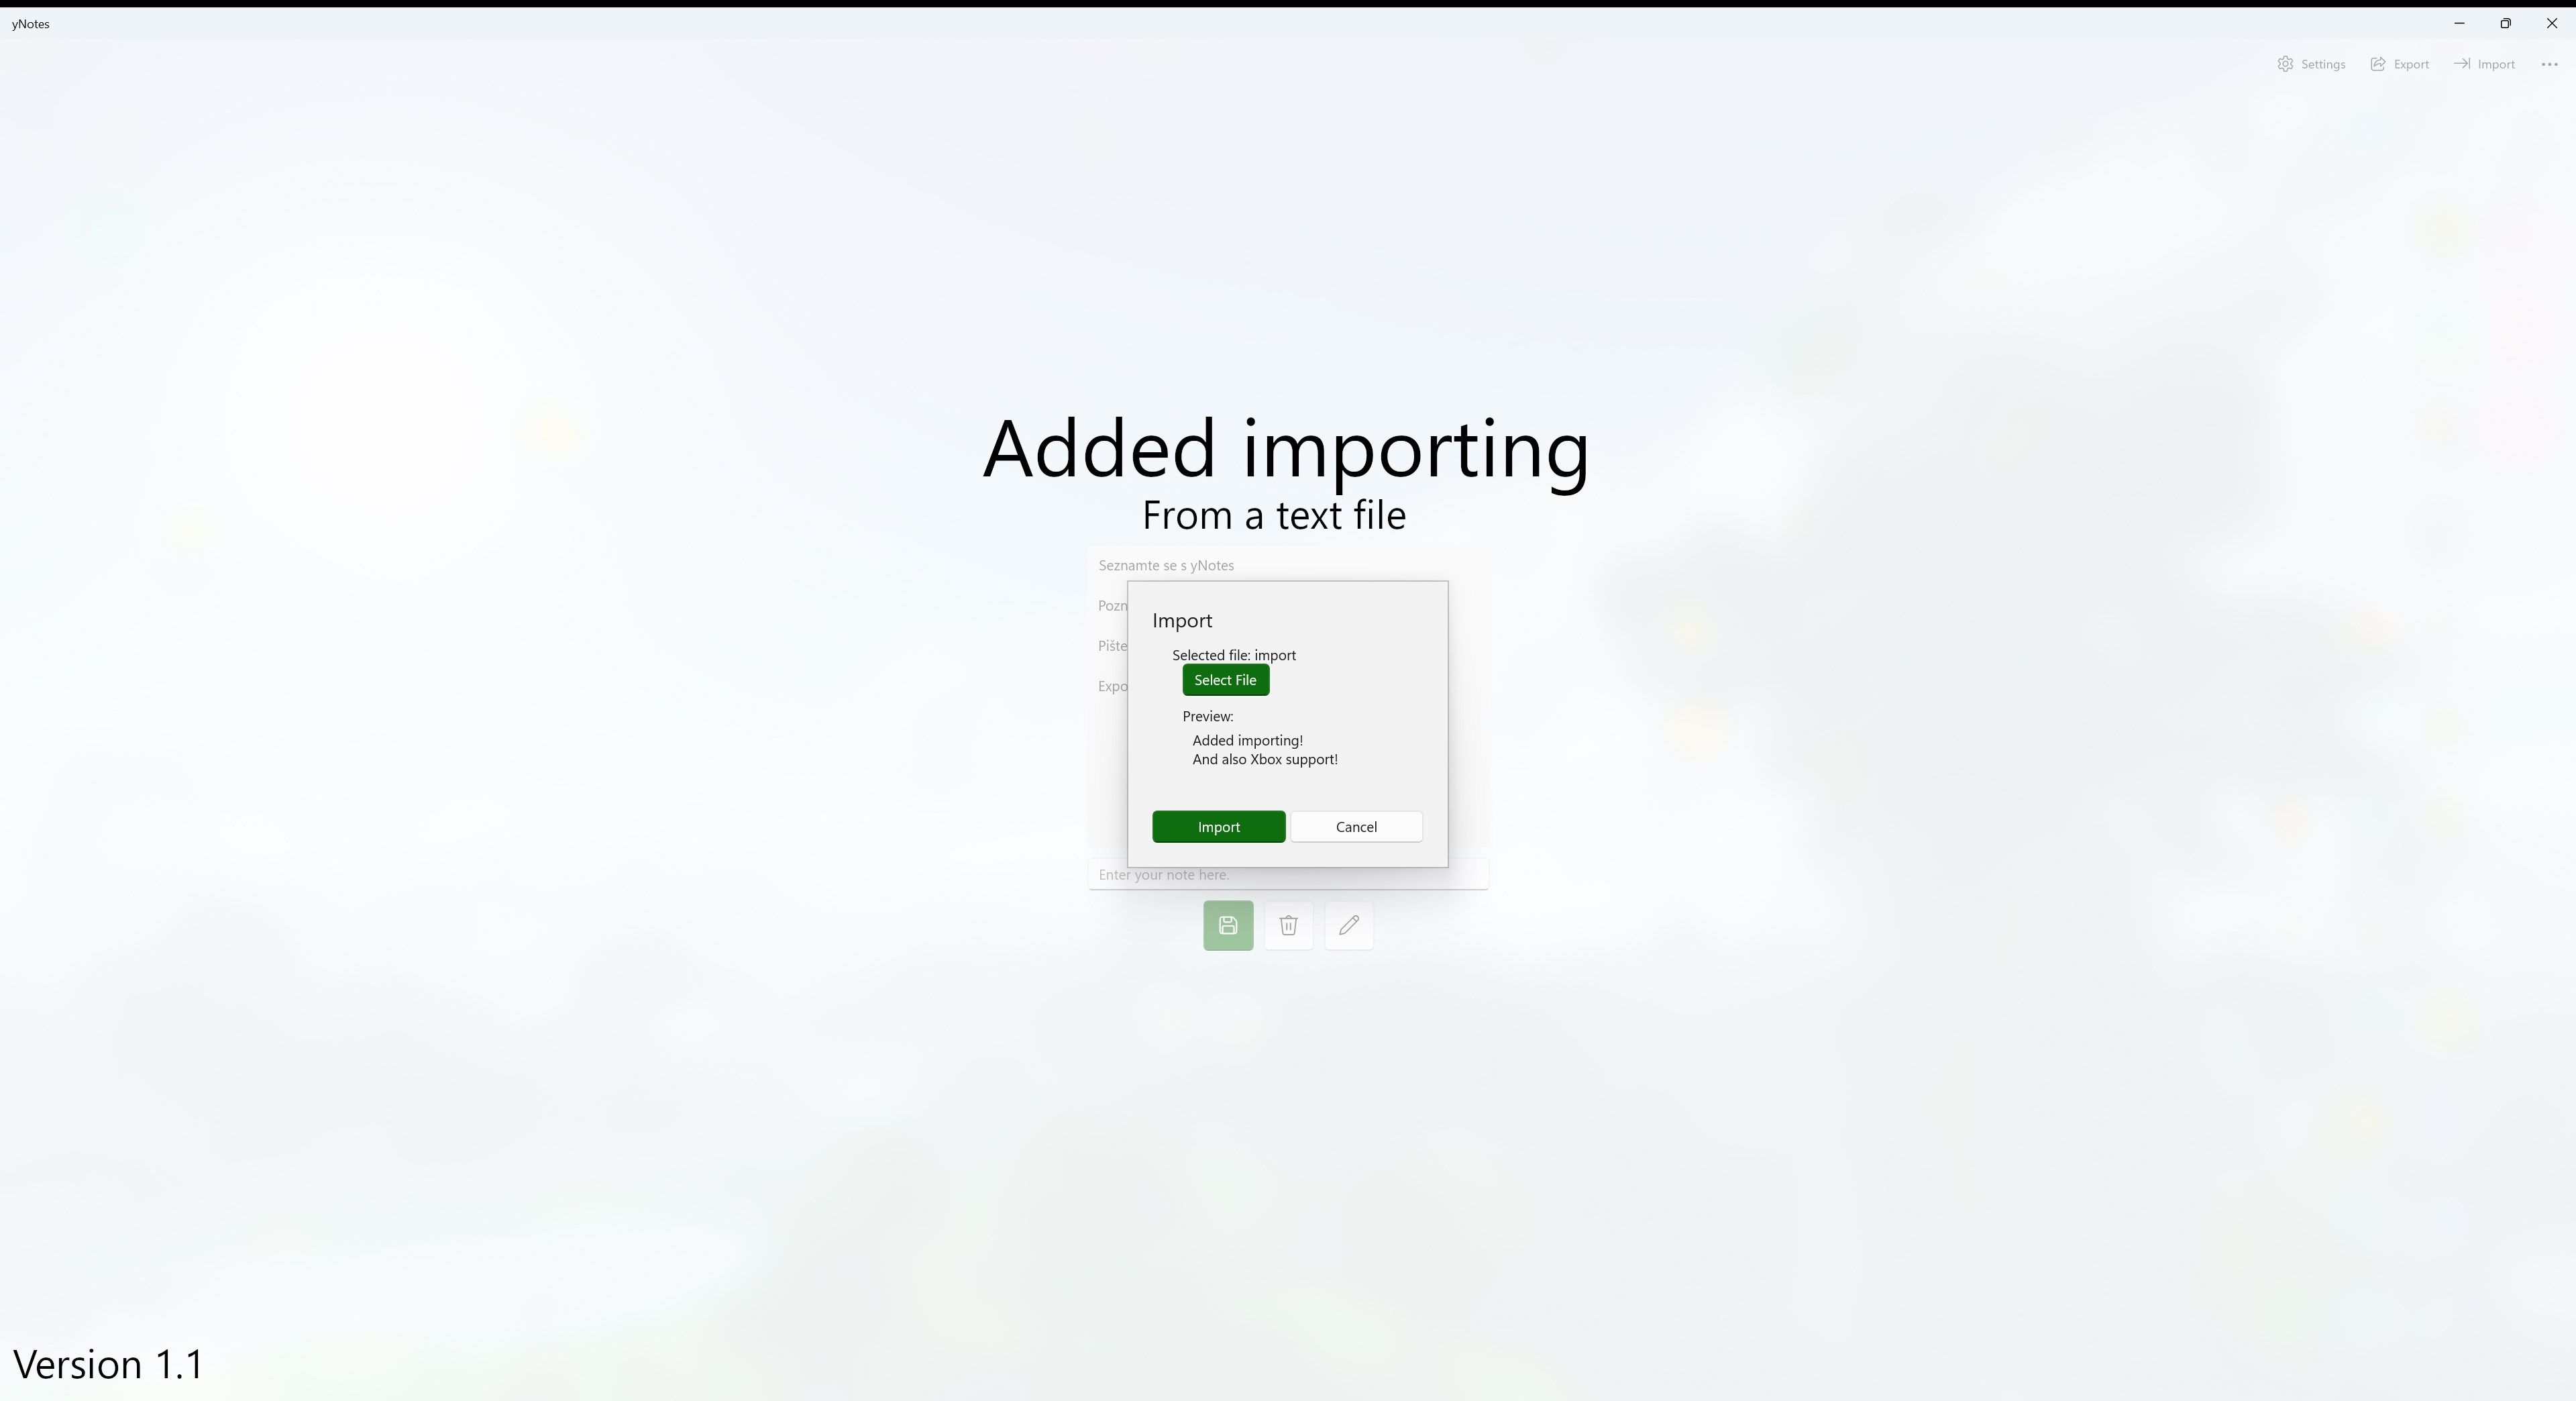 Added importing
From a text file
(Version 1.1)